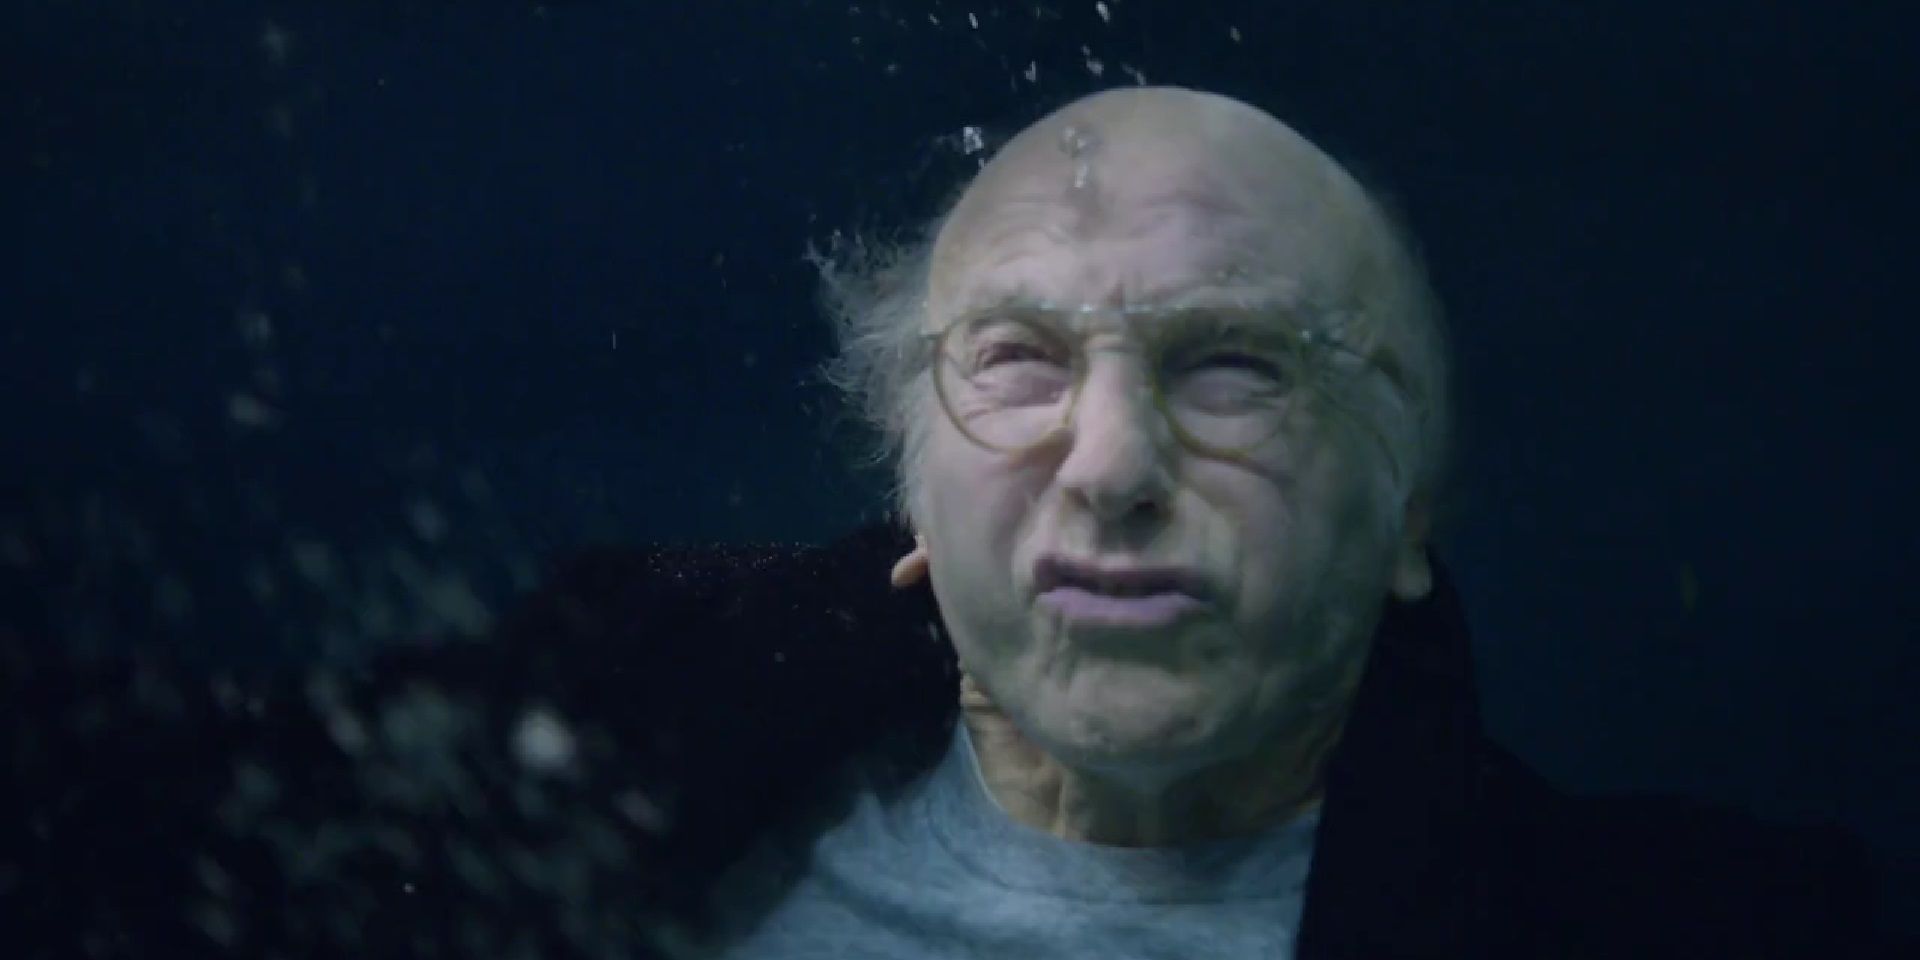 Larry plunges into a pool in the Curb Your Enthusiasm season 11 finale